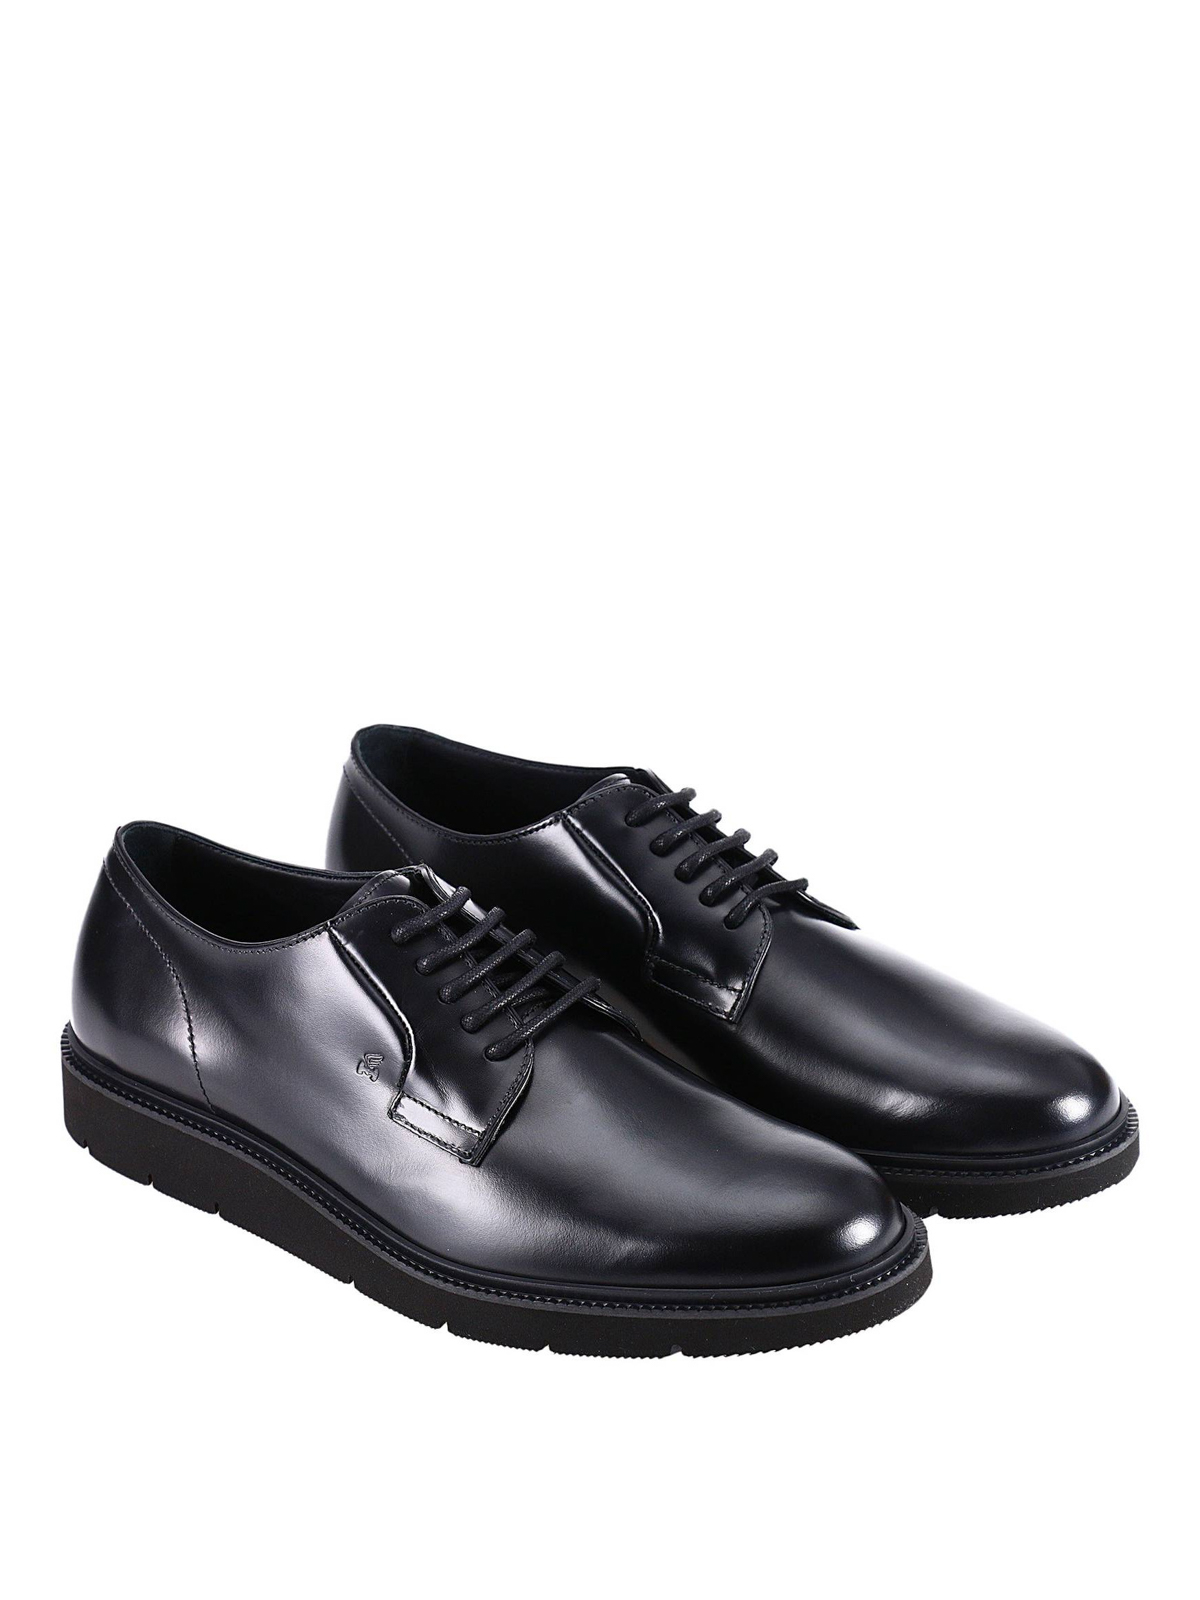 Dress X H322 leather Derby shoes 